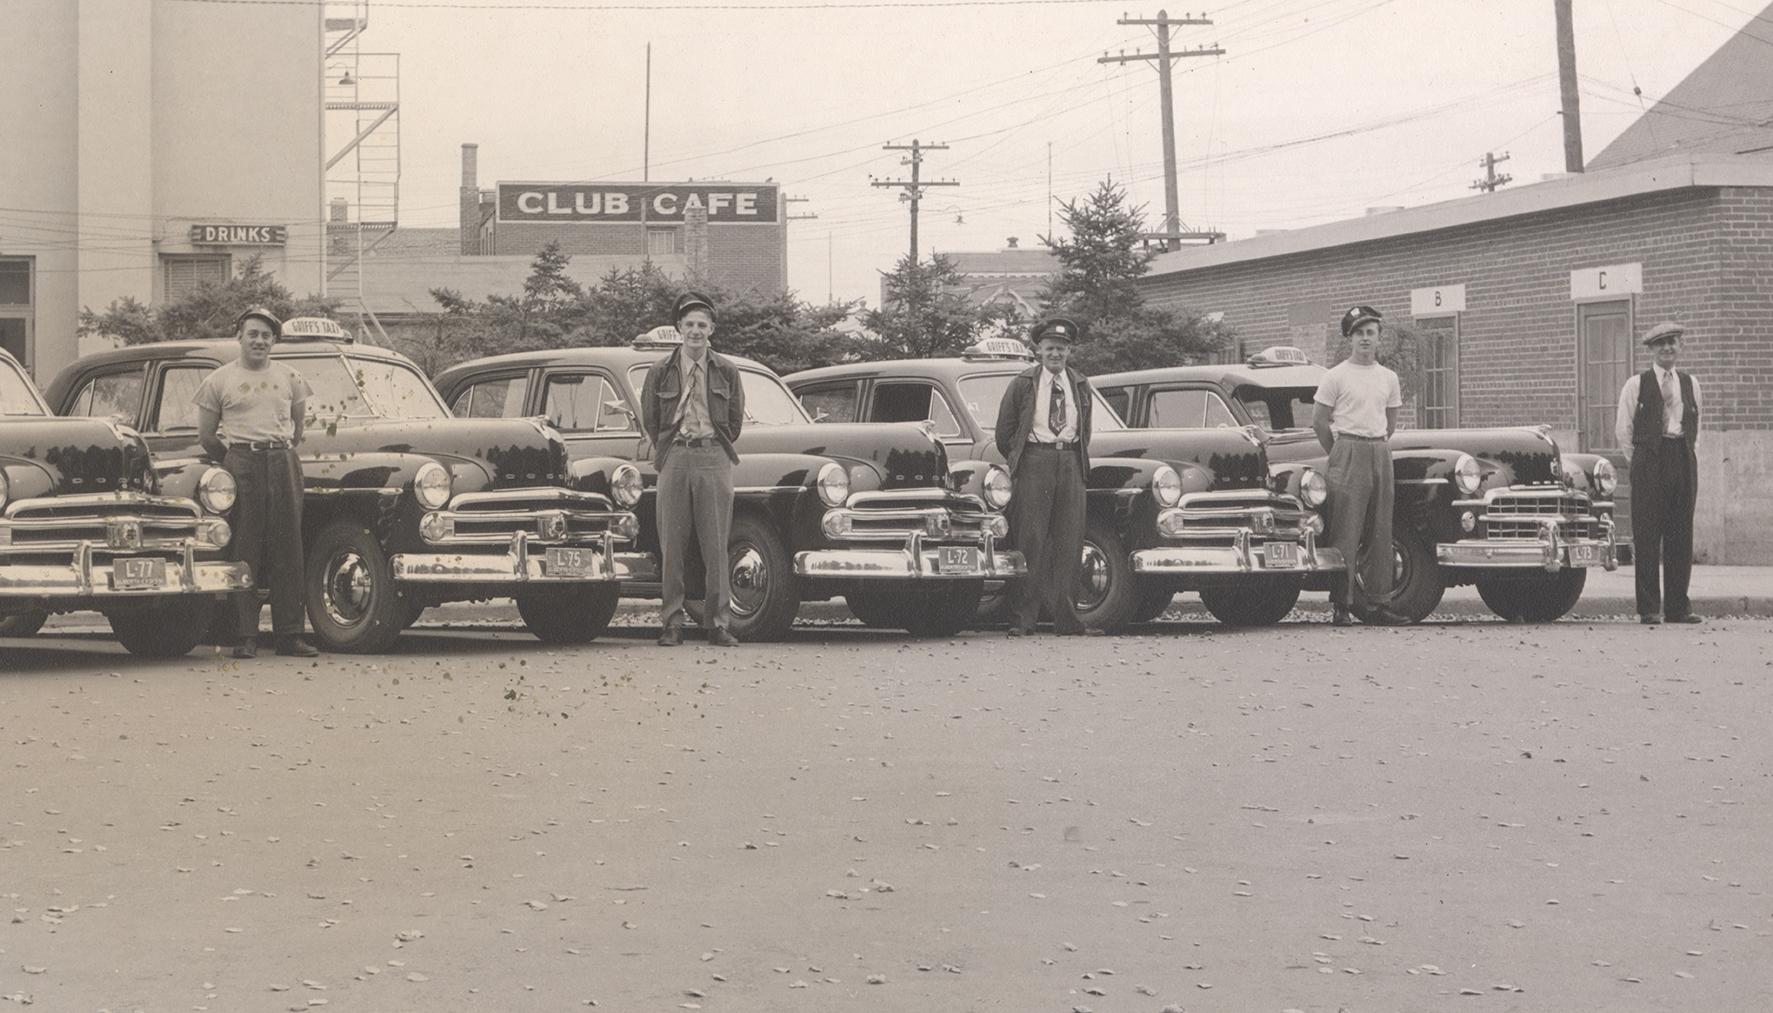 Men standing next to cars, ca. 1950s